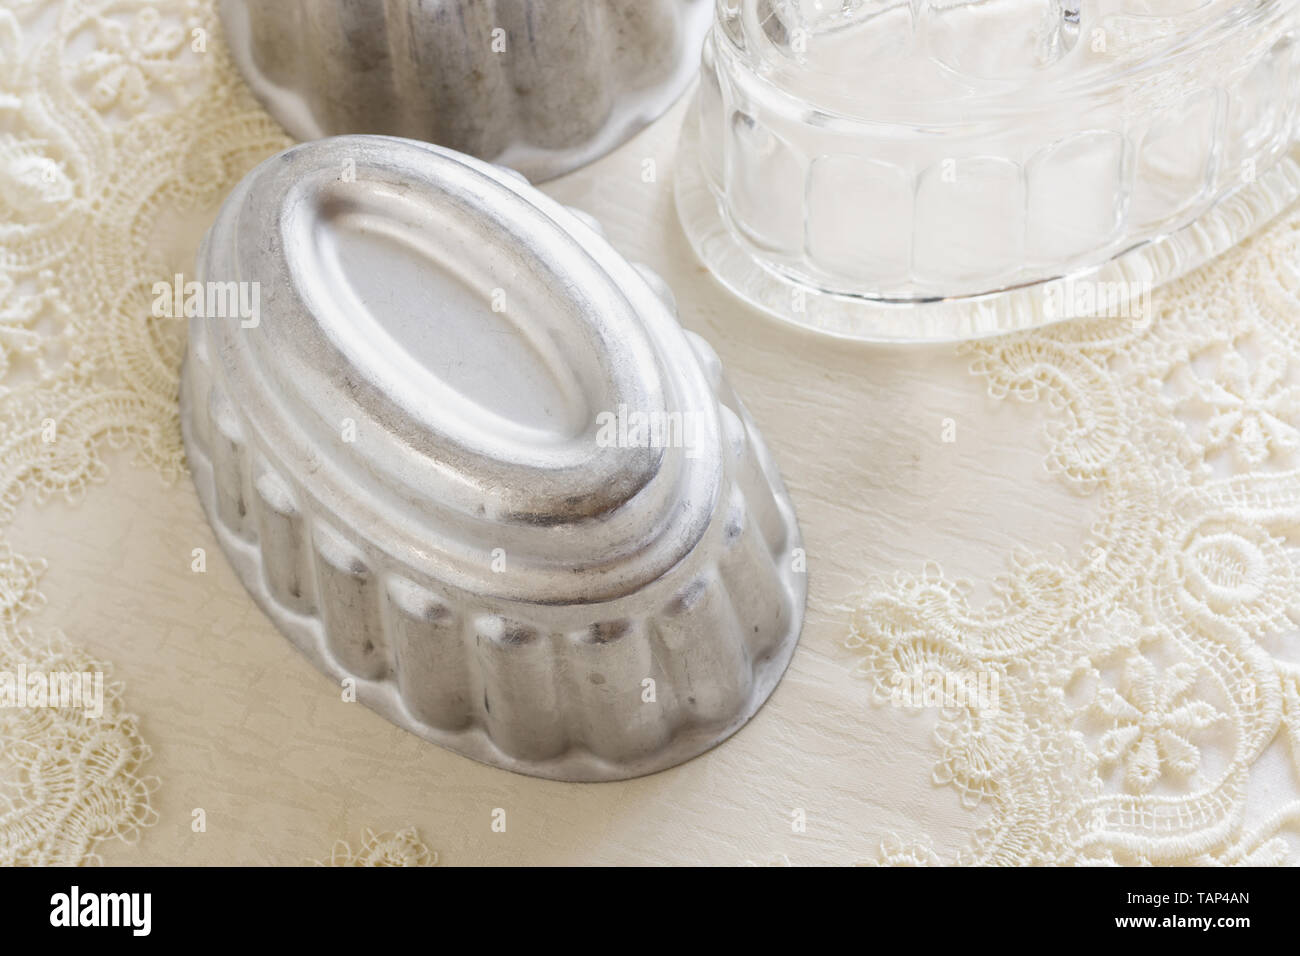 Old fashioned glass and aluminum jelly or blancmange moulds for making traditional jellies Stock Photo